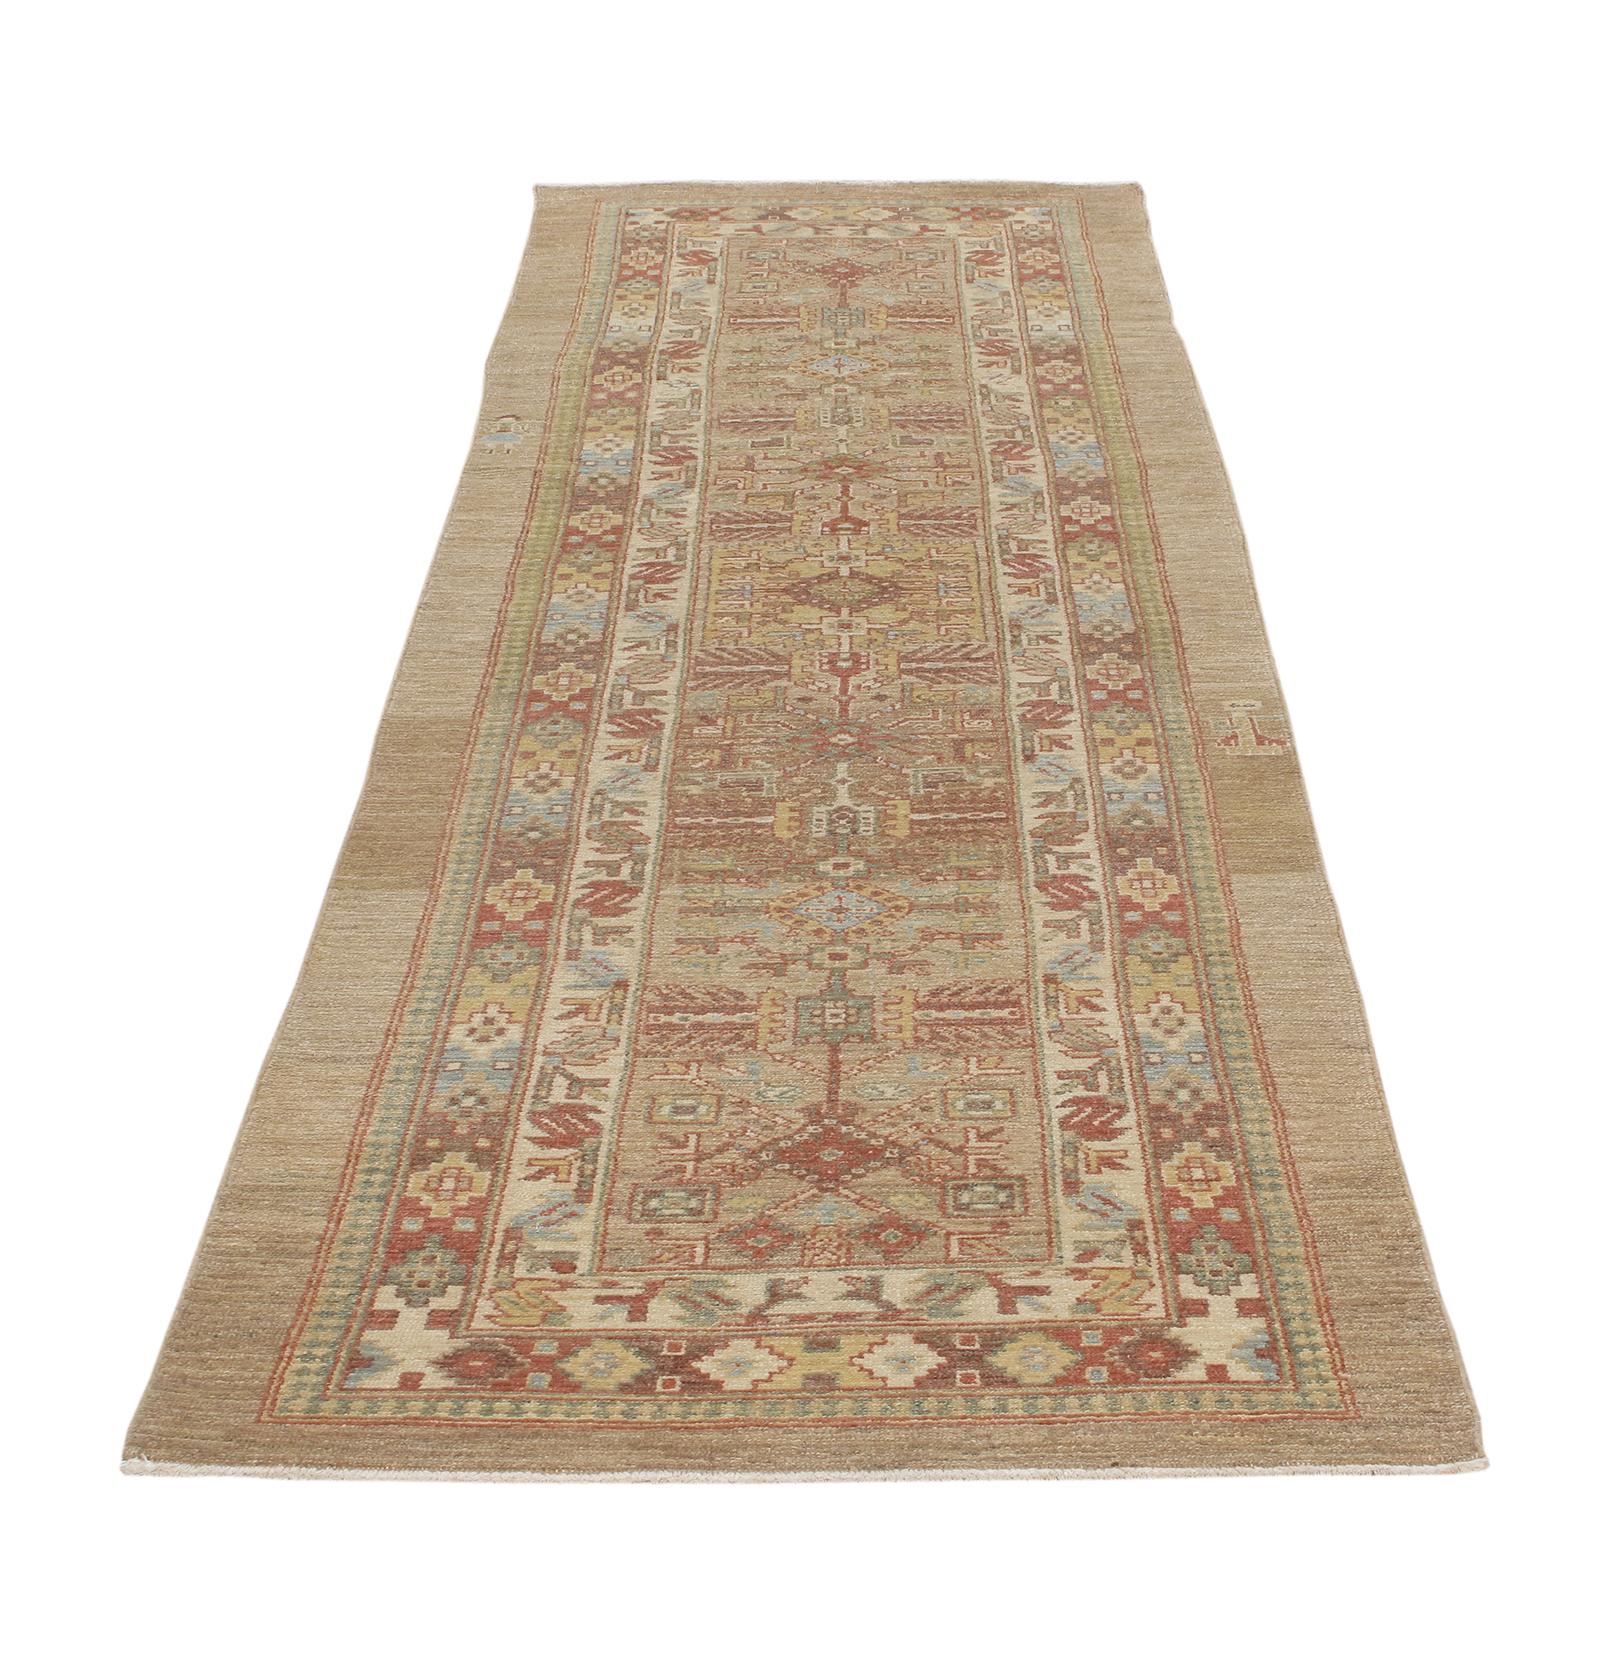 This Persian tribal hand-knotted runner rug is hand-carded with the finest wool, and made with all natural dyes by the local Kurdish artisan weaves in Iran. Custom sizes and colors available. Rug size 2'9